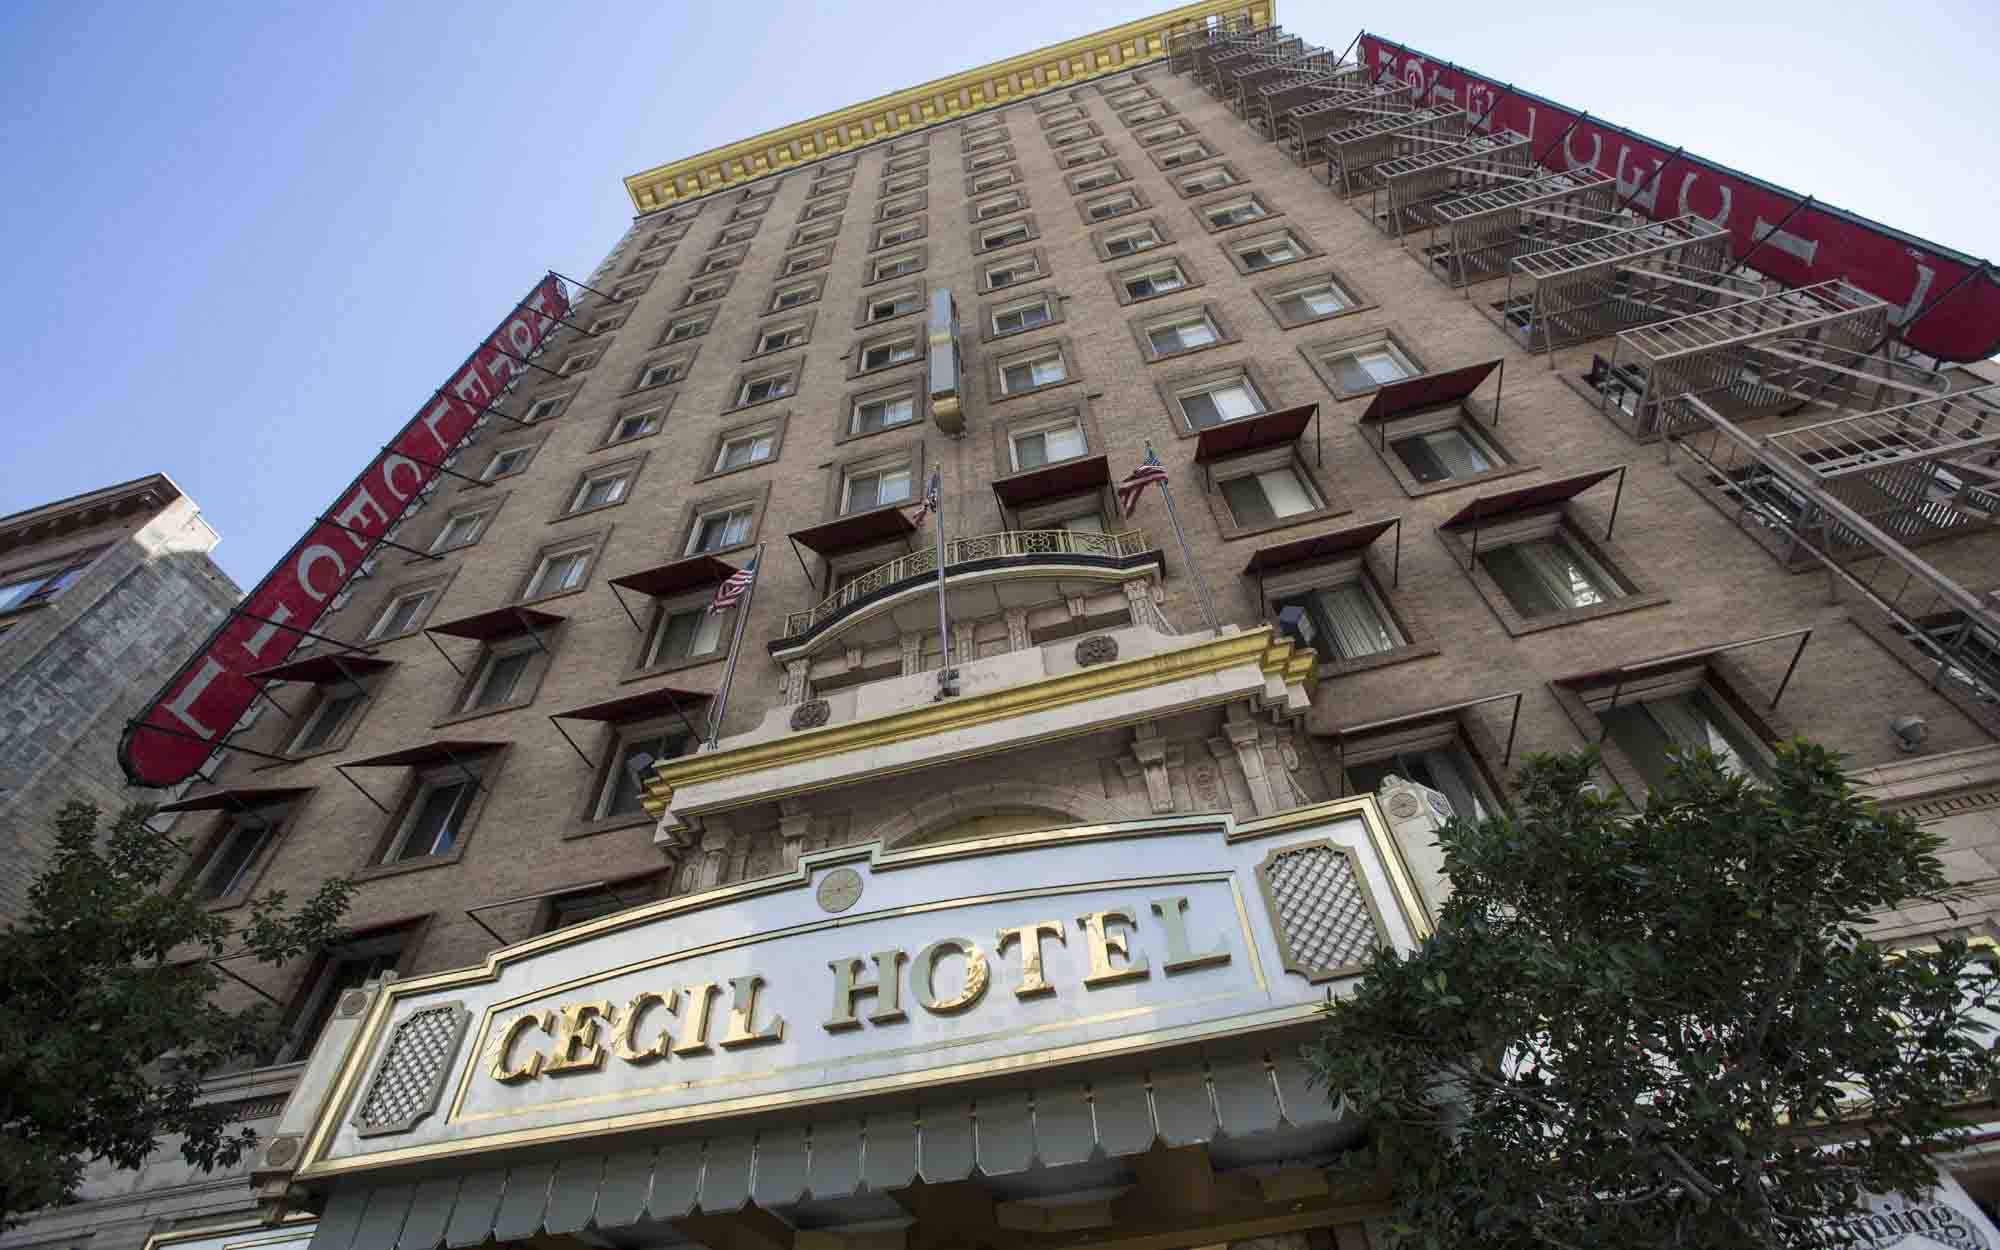 The Hotel Cecil Everything to know about its bloodsoaked past Film